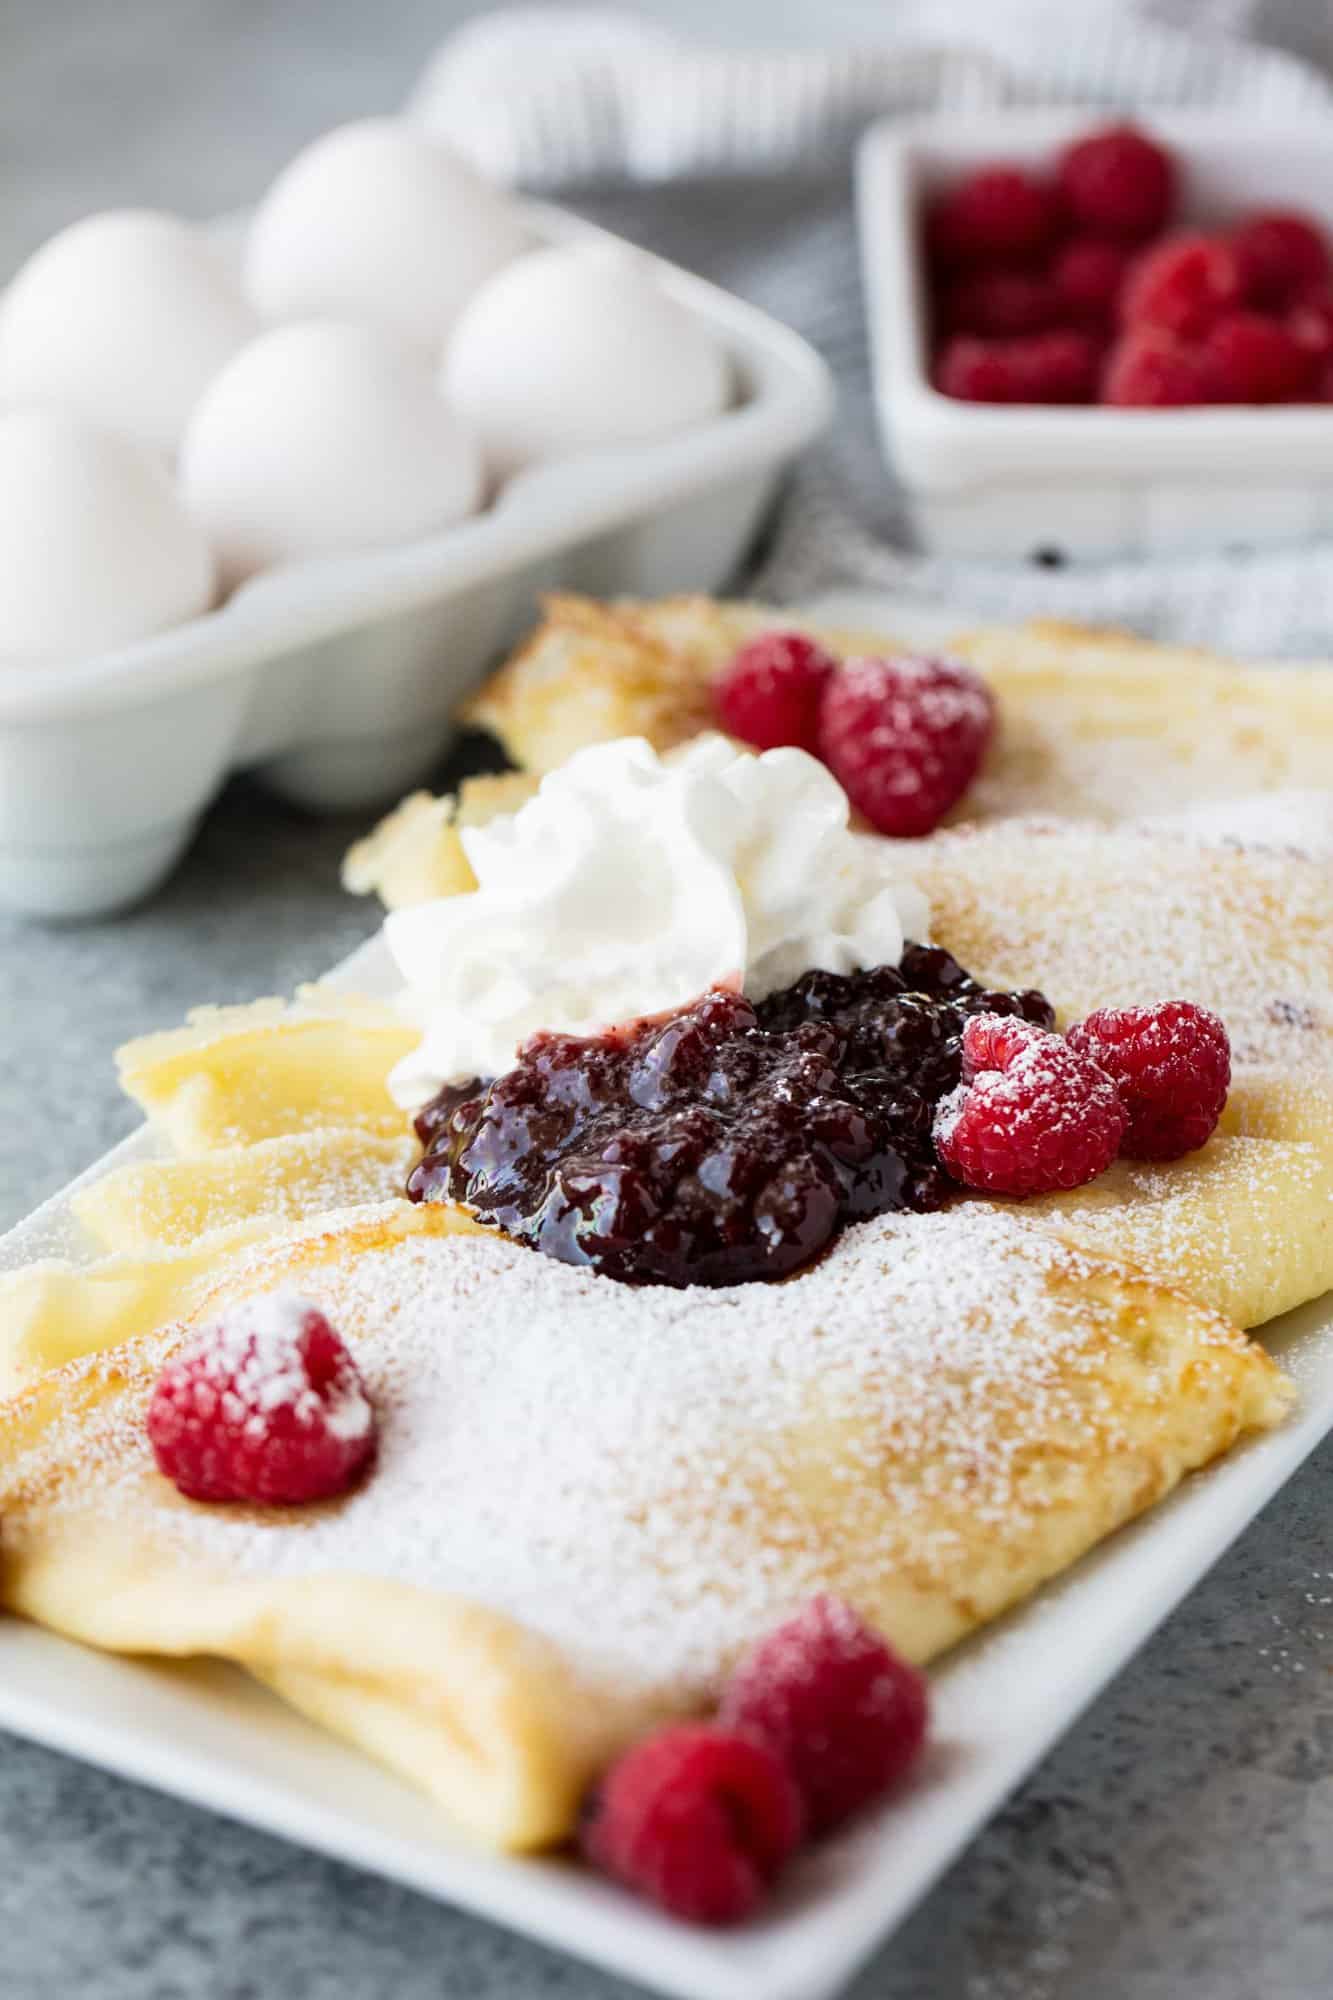 Fluffy Swedish Pancakes come together in minutes making it a fun breakfast or brunch item that the whole family will love. Dust them with a little powdered sugar and serve with fresh fruit, jam, and whipped cream!